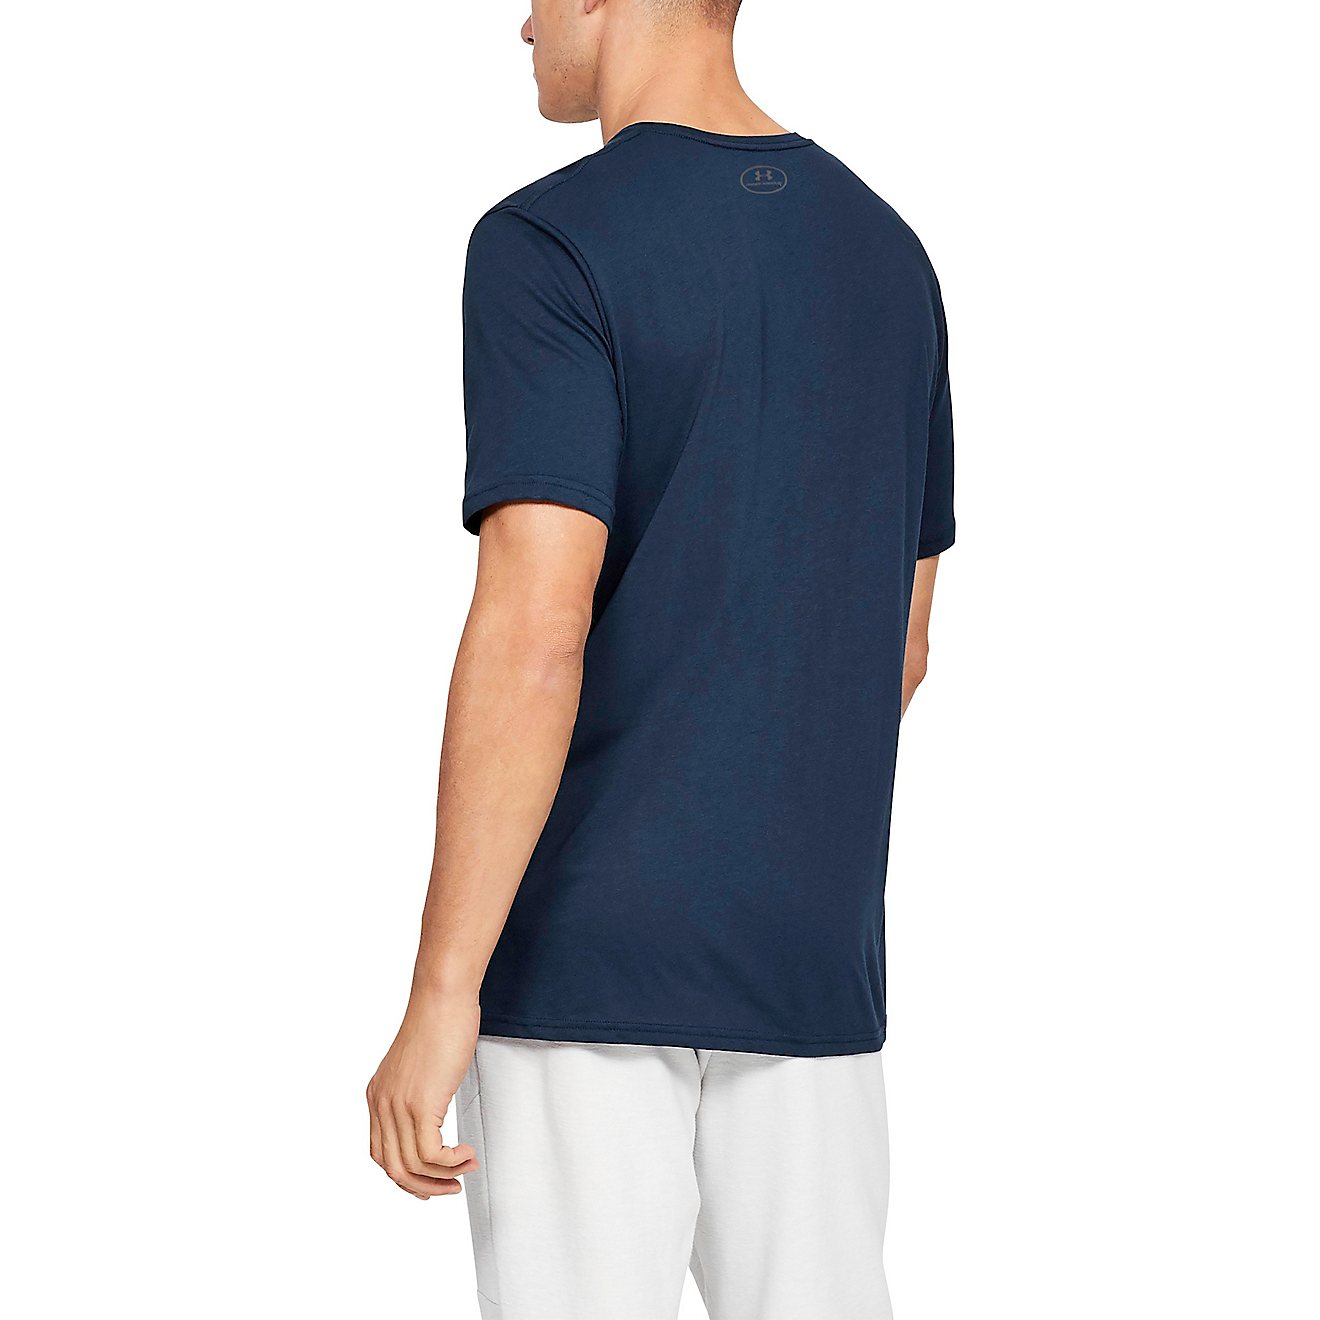 Under Armour Men's Sportstyle Logo T-shirt                                                                                       - view number 2